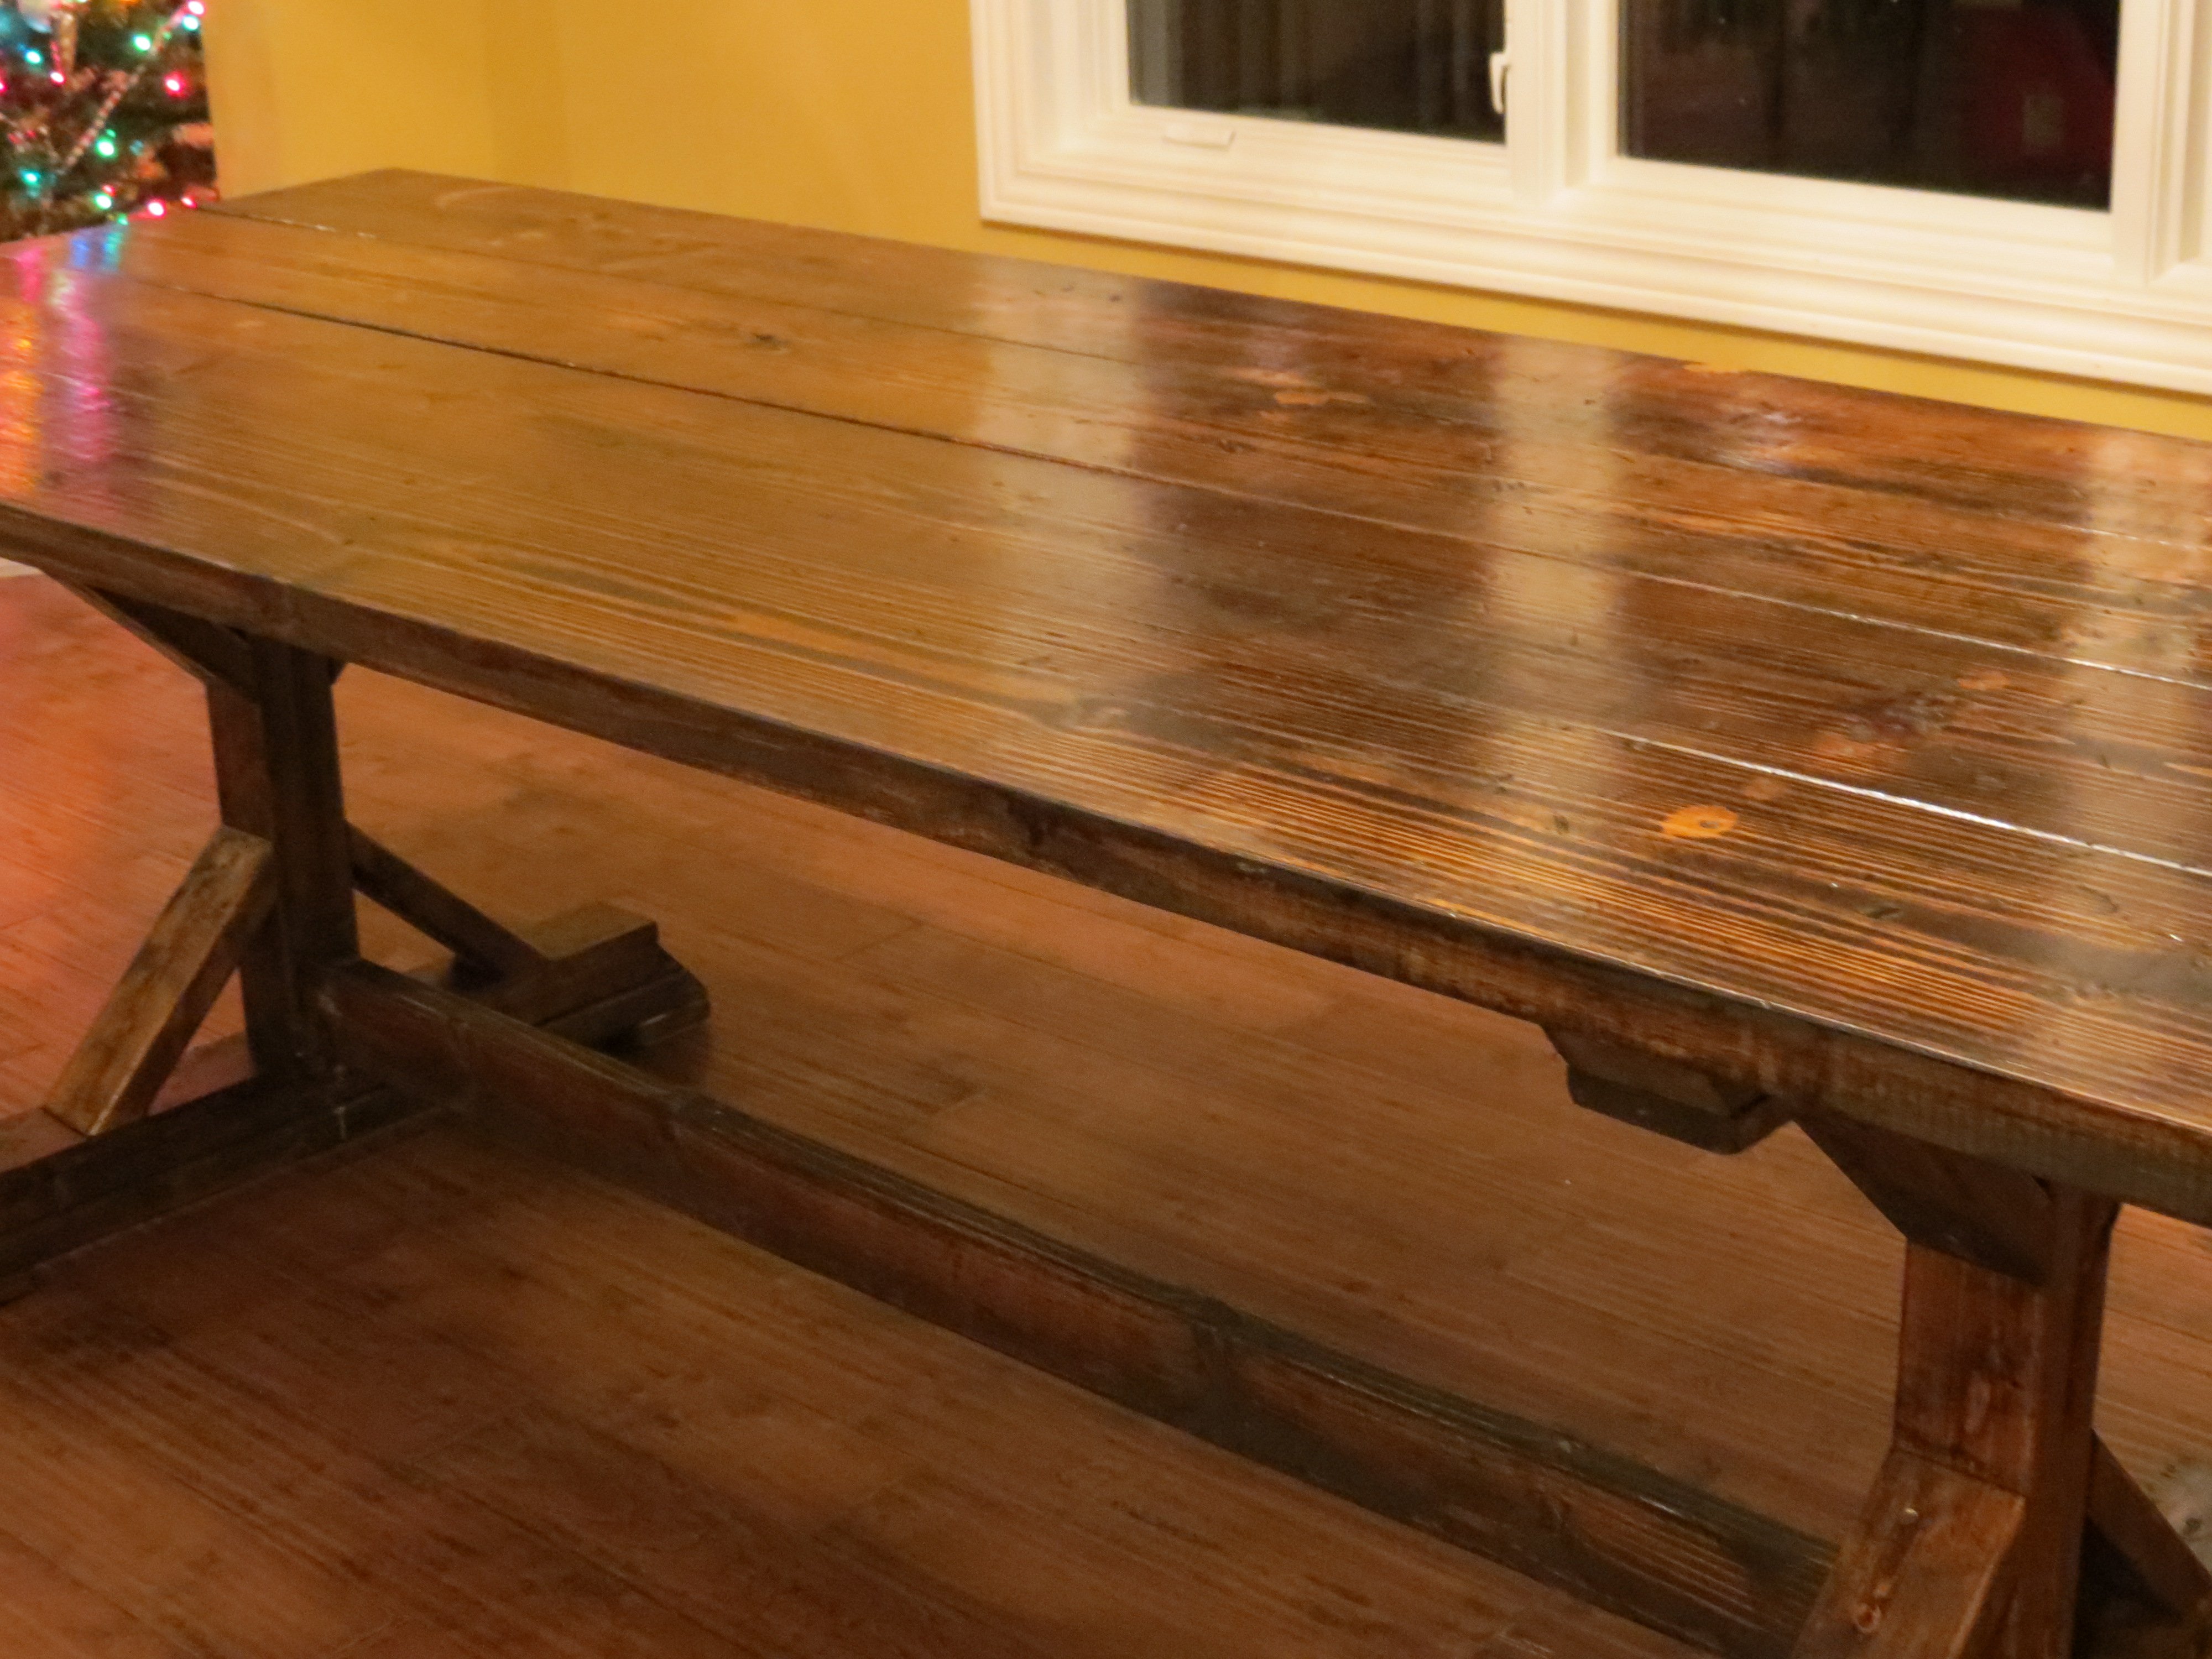 Rustic Farmhouse table from Let's Just Build a House! Blog | Do It ...